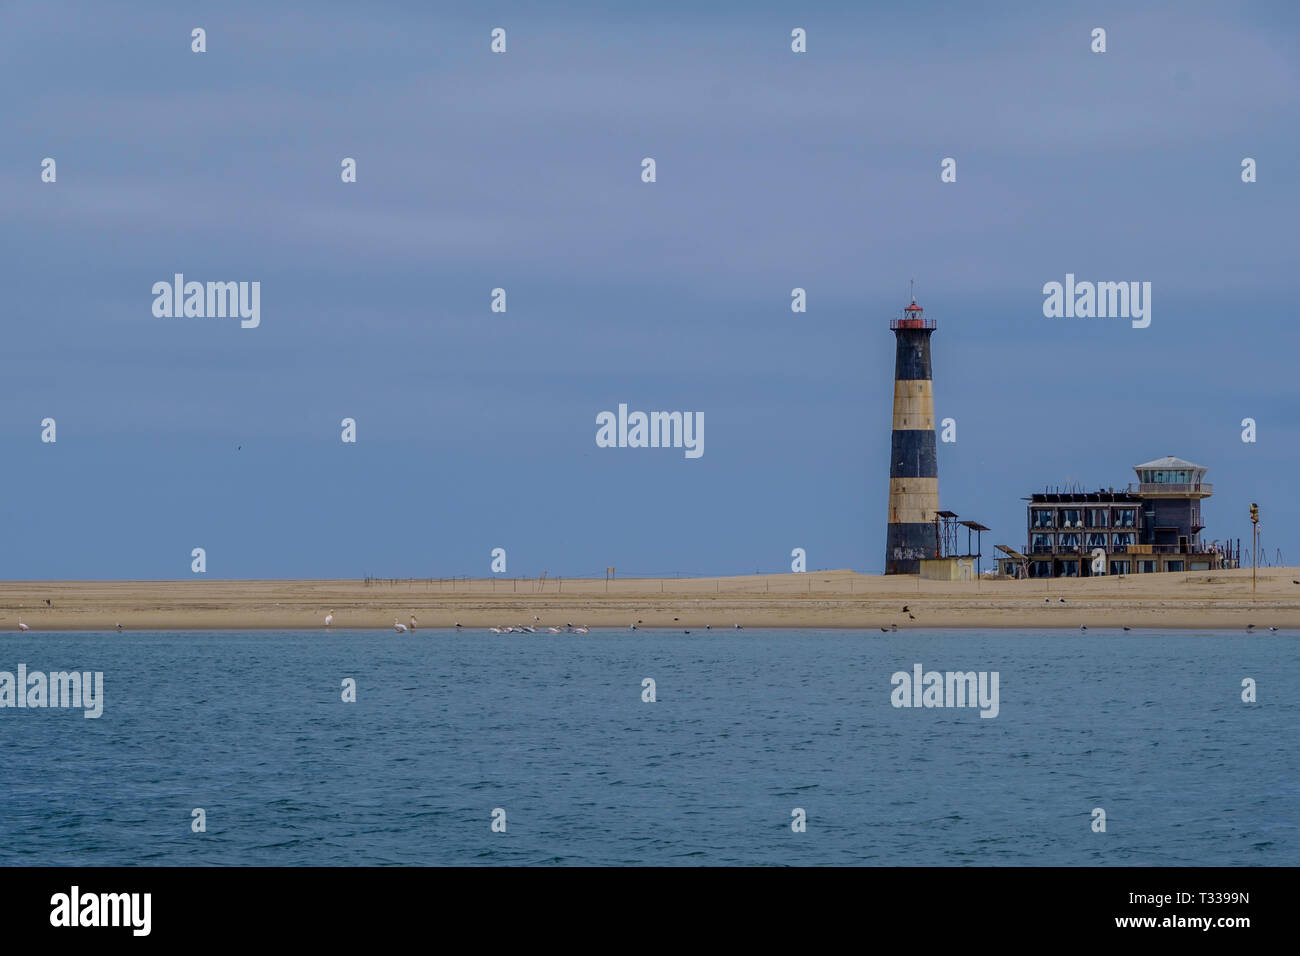 Blue and white stripes of Pelican Point Lighthouse next to lodge perched on strip of sand in Atlantic Ocean with birdlife on shore with copy space Stock Photo